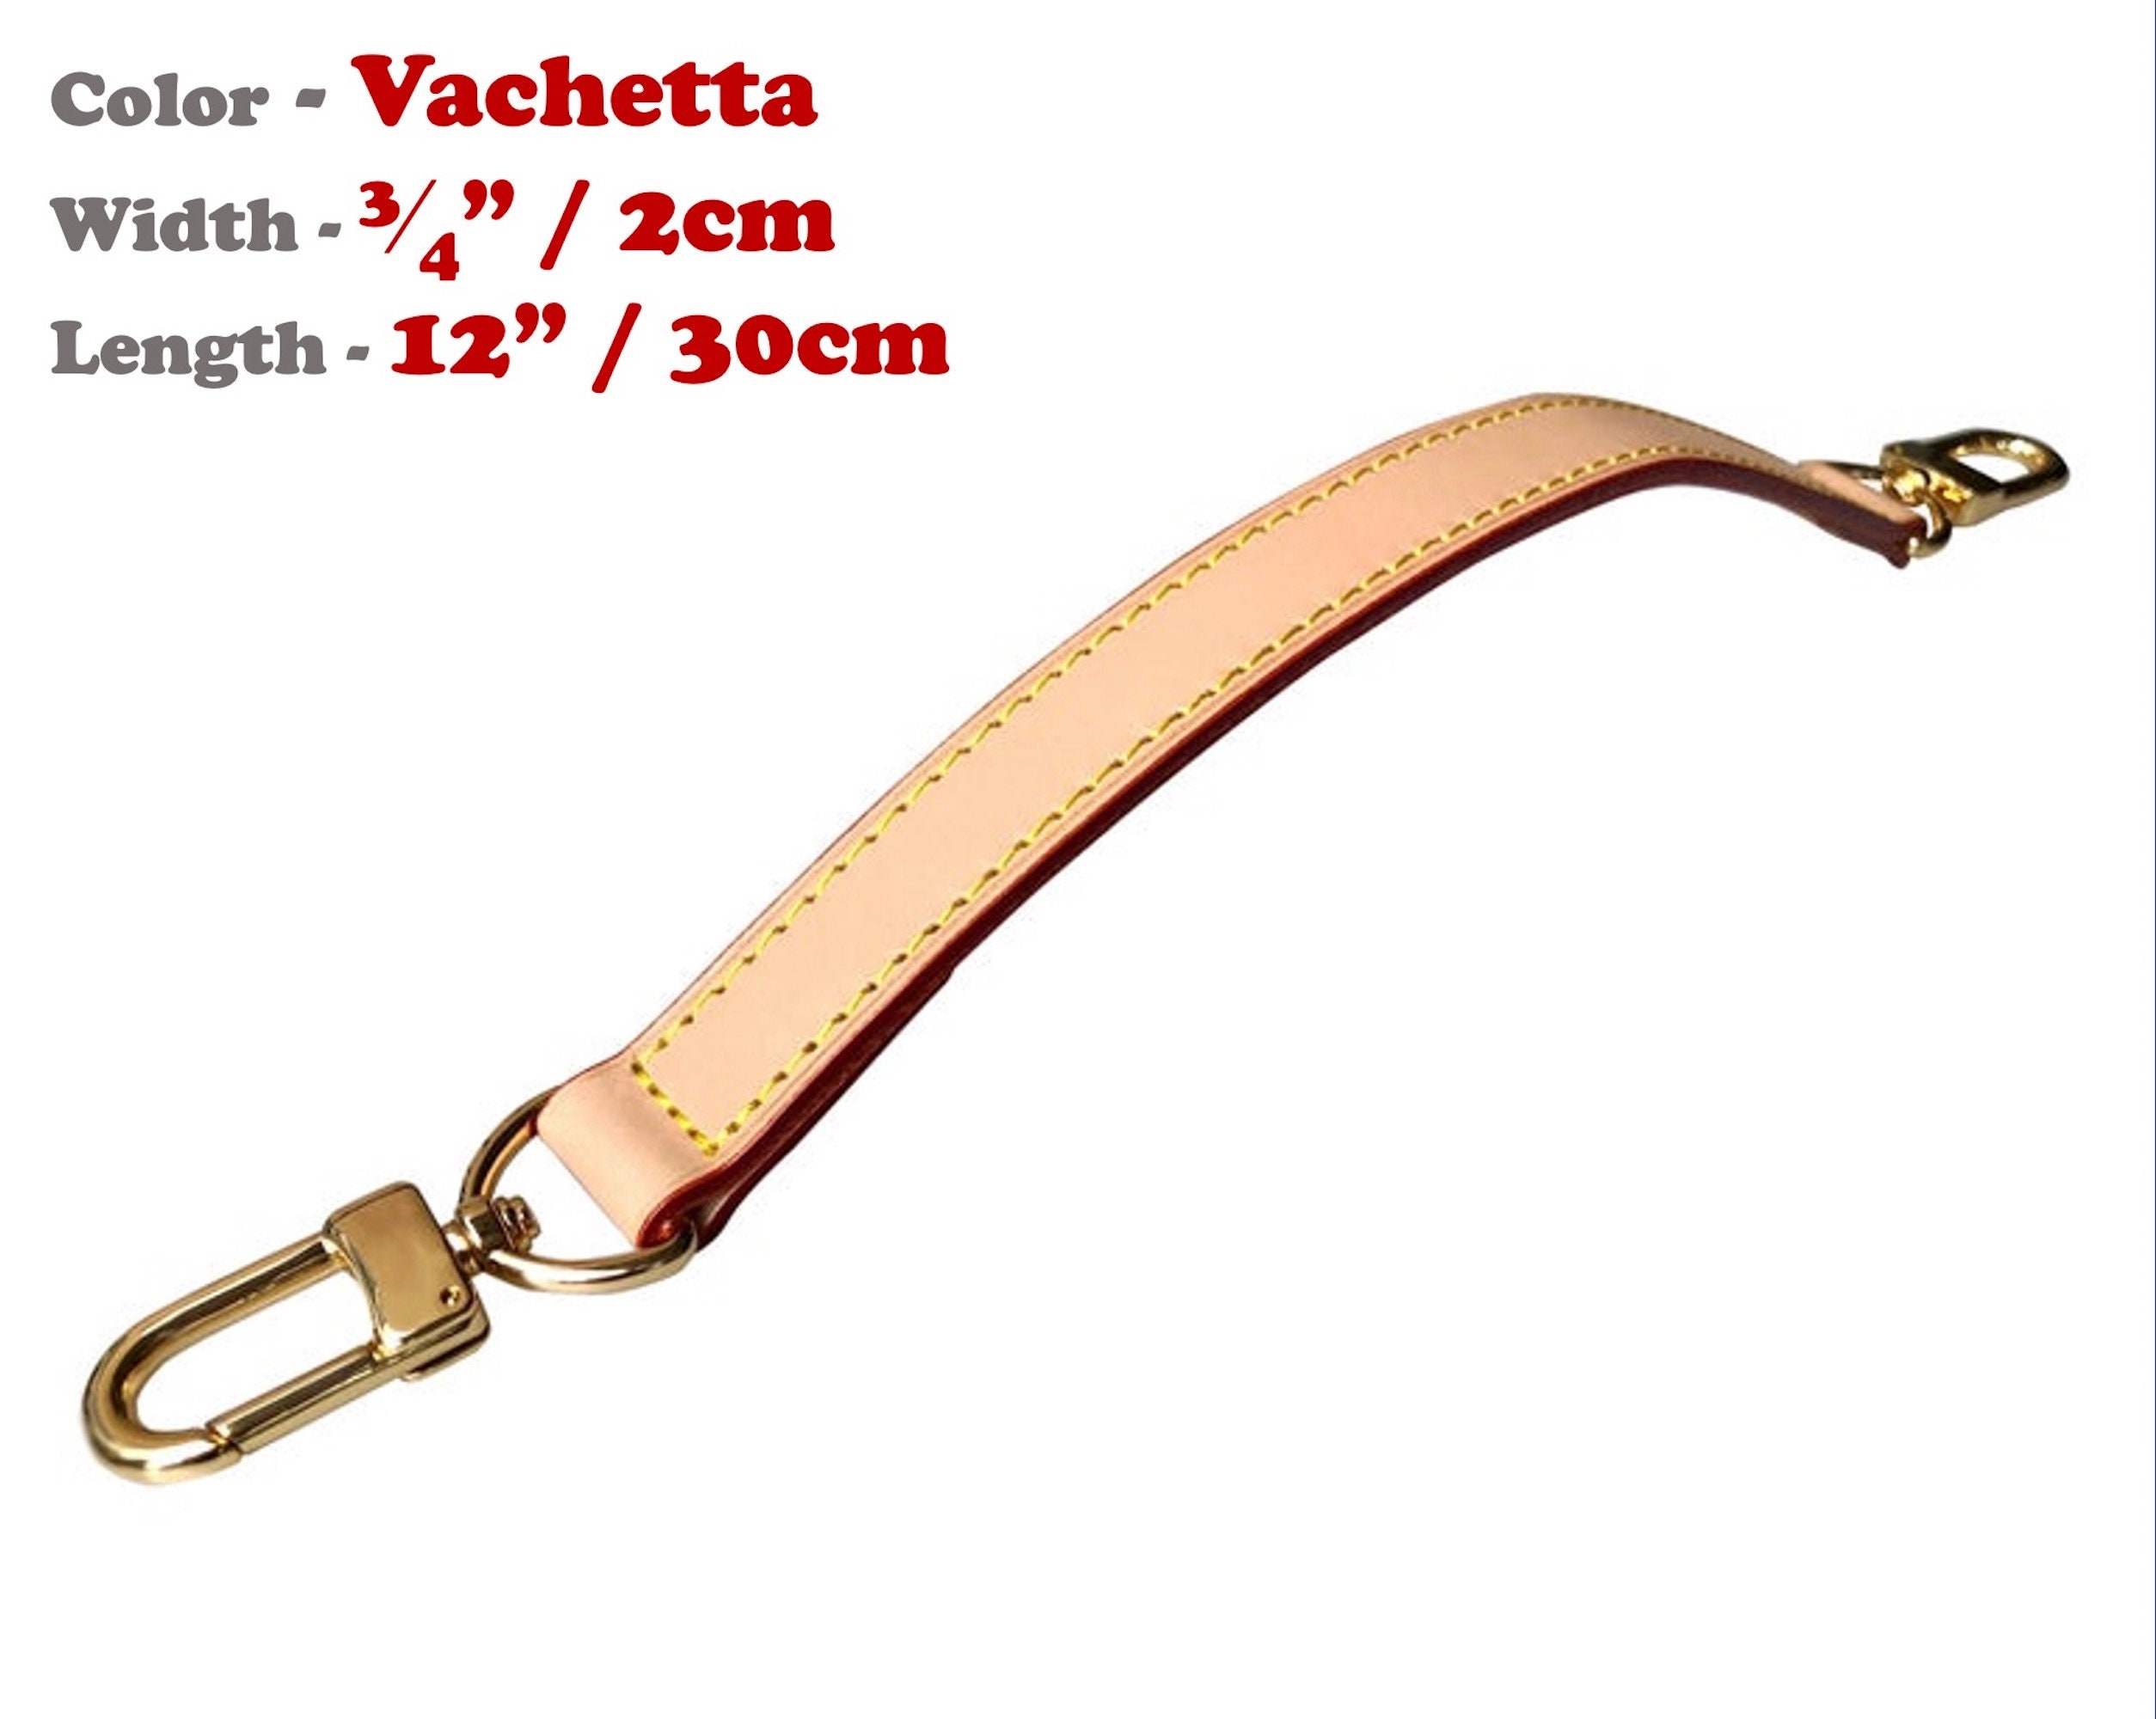 2.5cm Width - Vachetta Thick Strap, Customized in Any Length, Universal Designer Tote Crossbody Bag Top Handle Purse with Gold Claw Clasps Red / 12